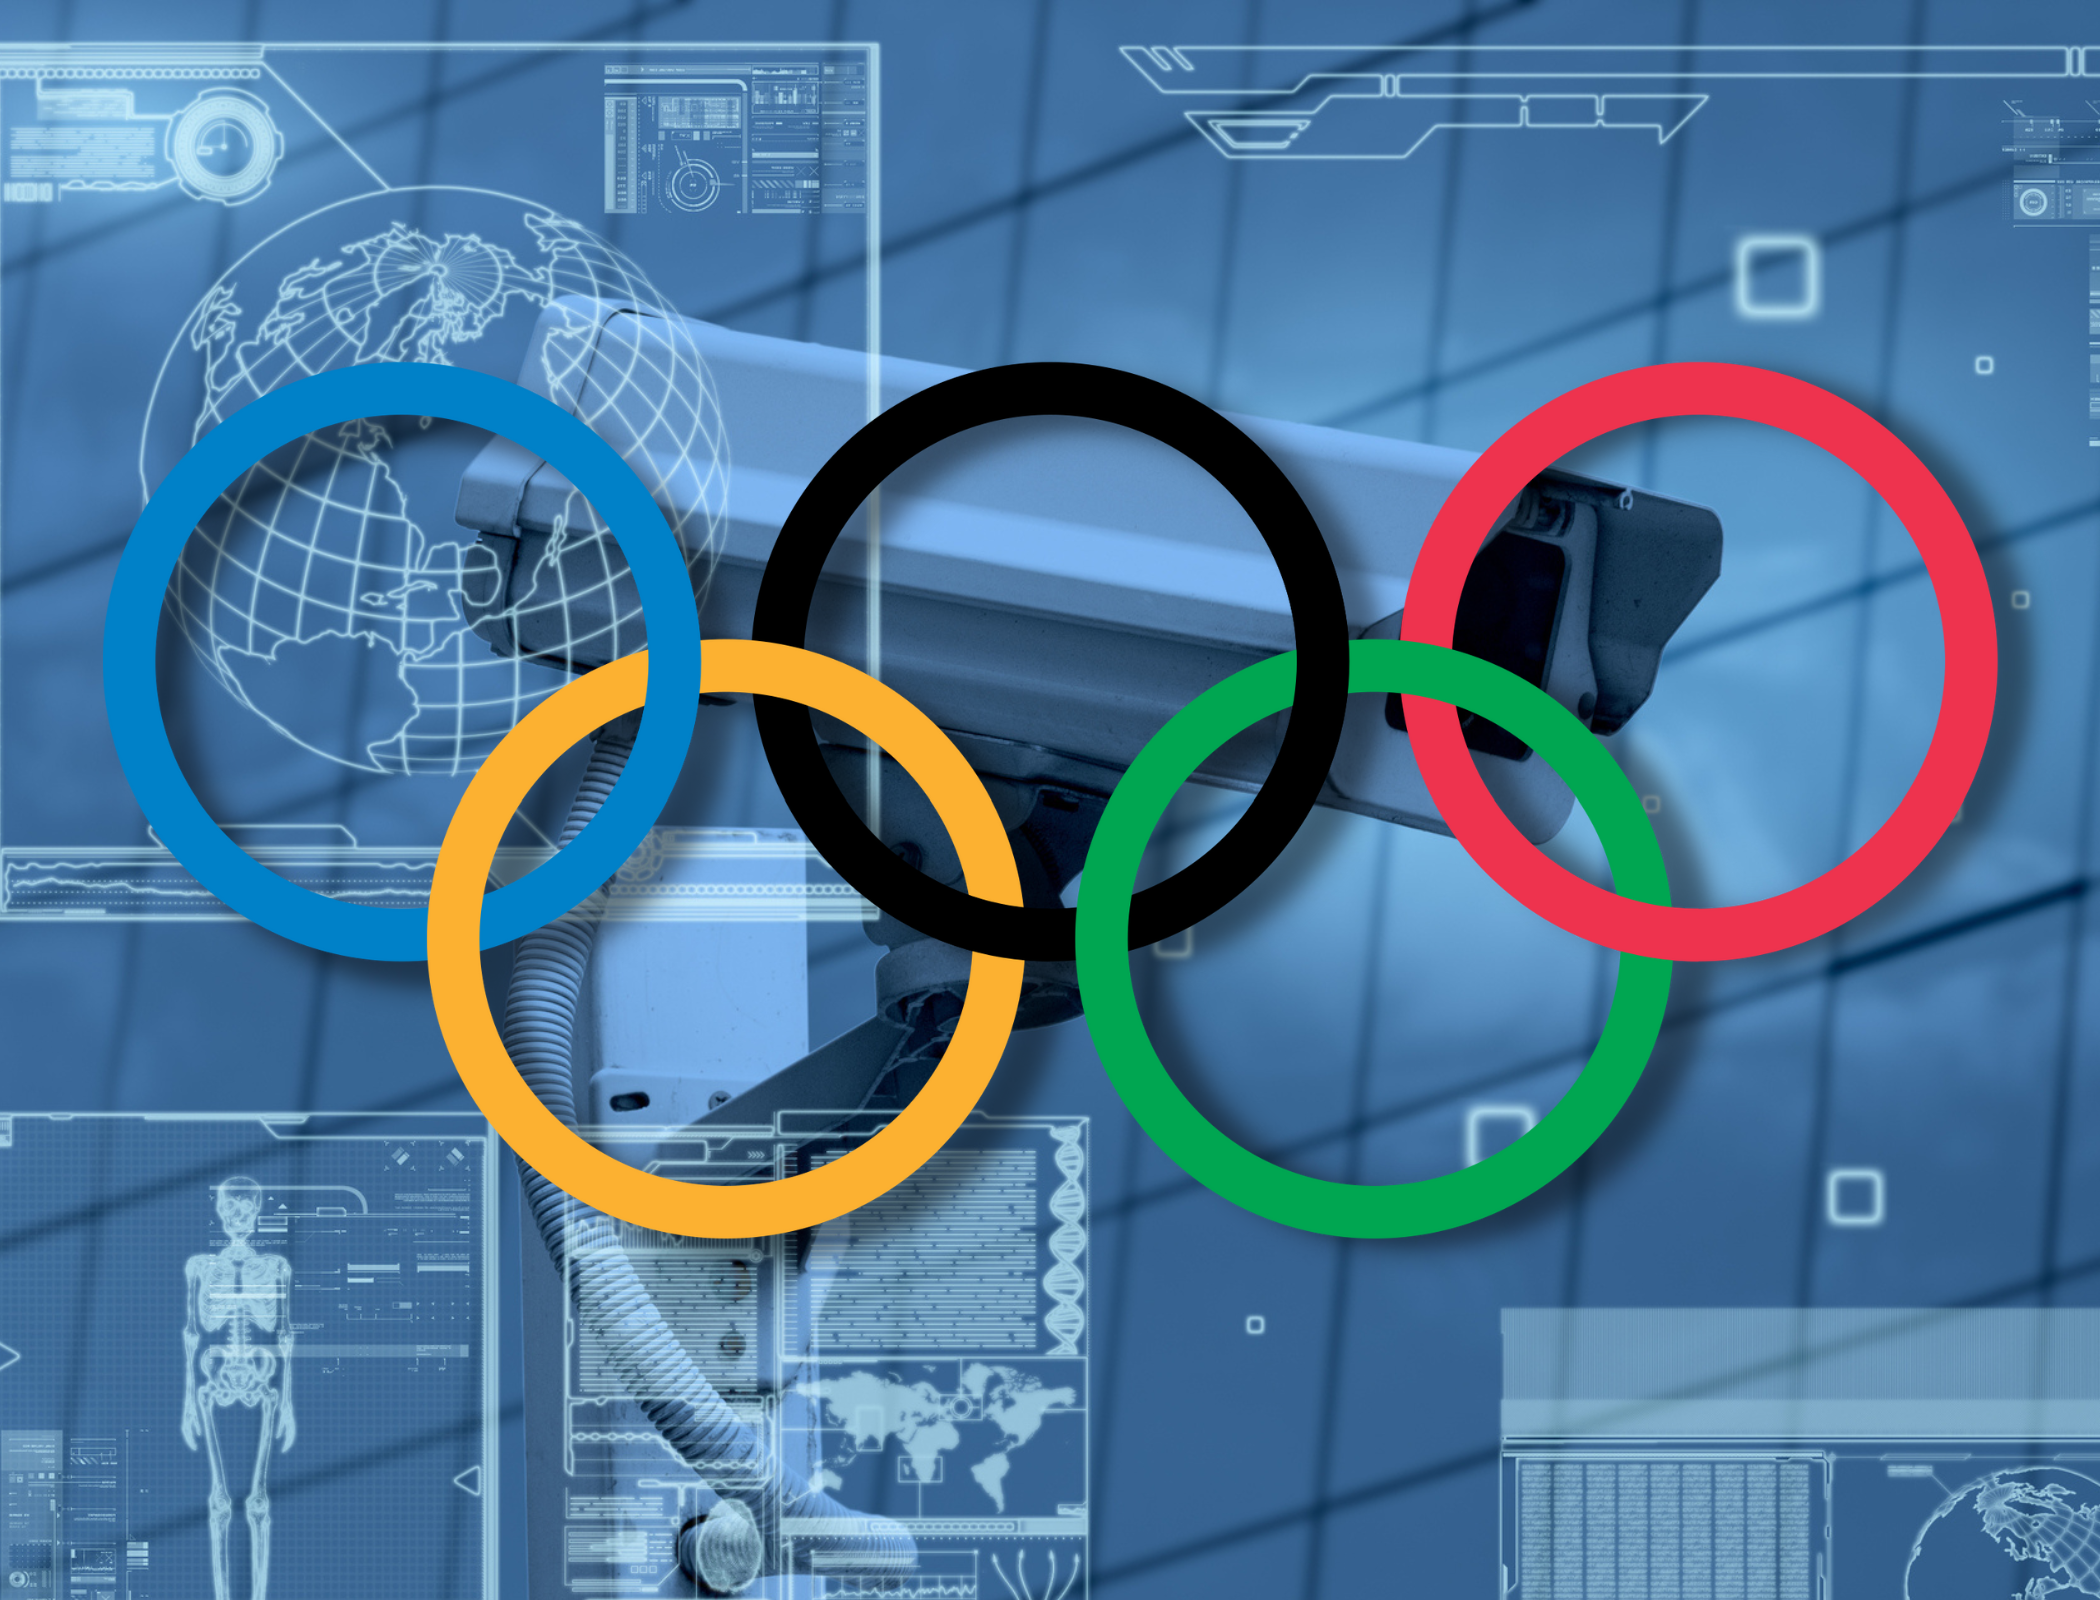 France to trial AI surveillance technology at 2024 Olympic Games, despite concerns